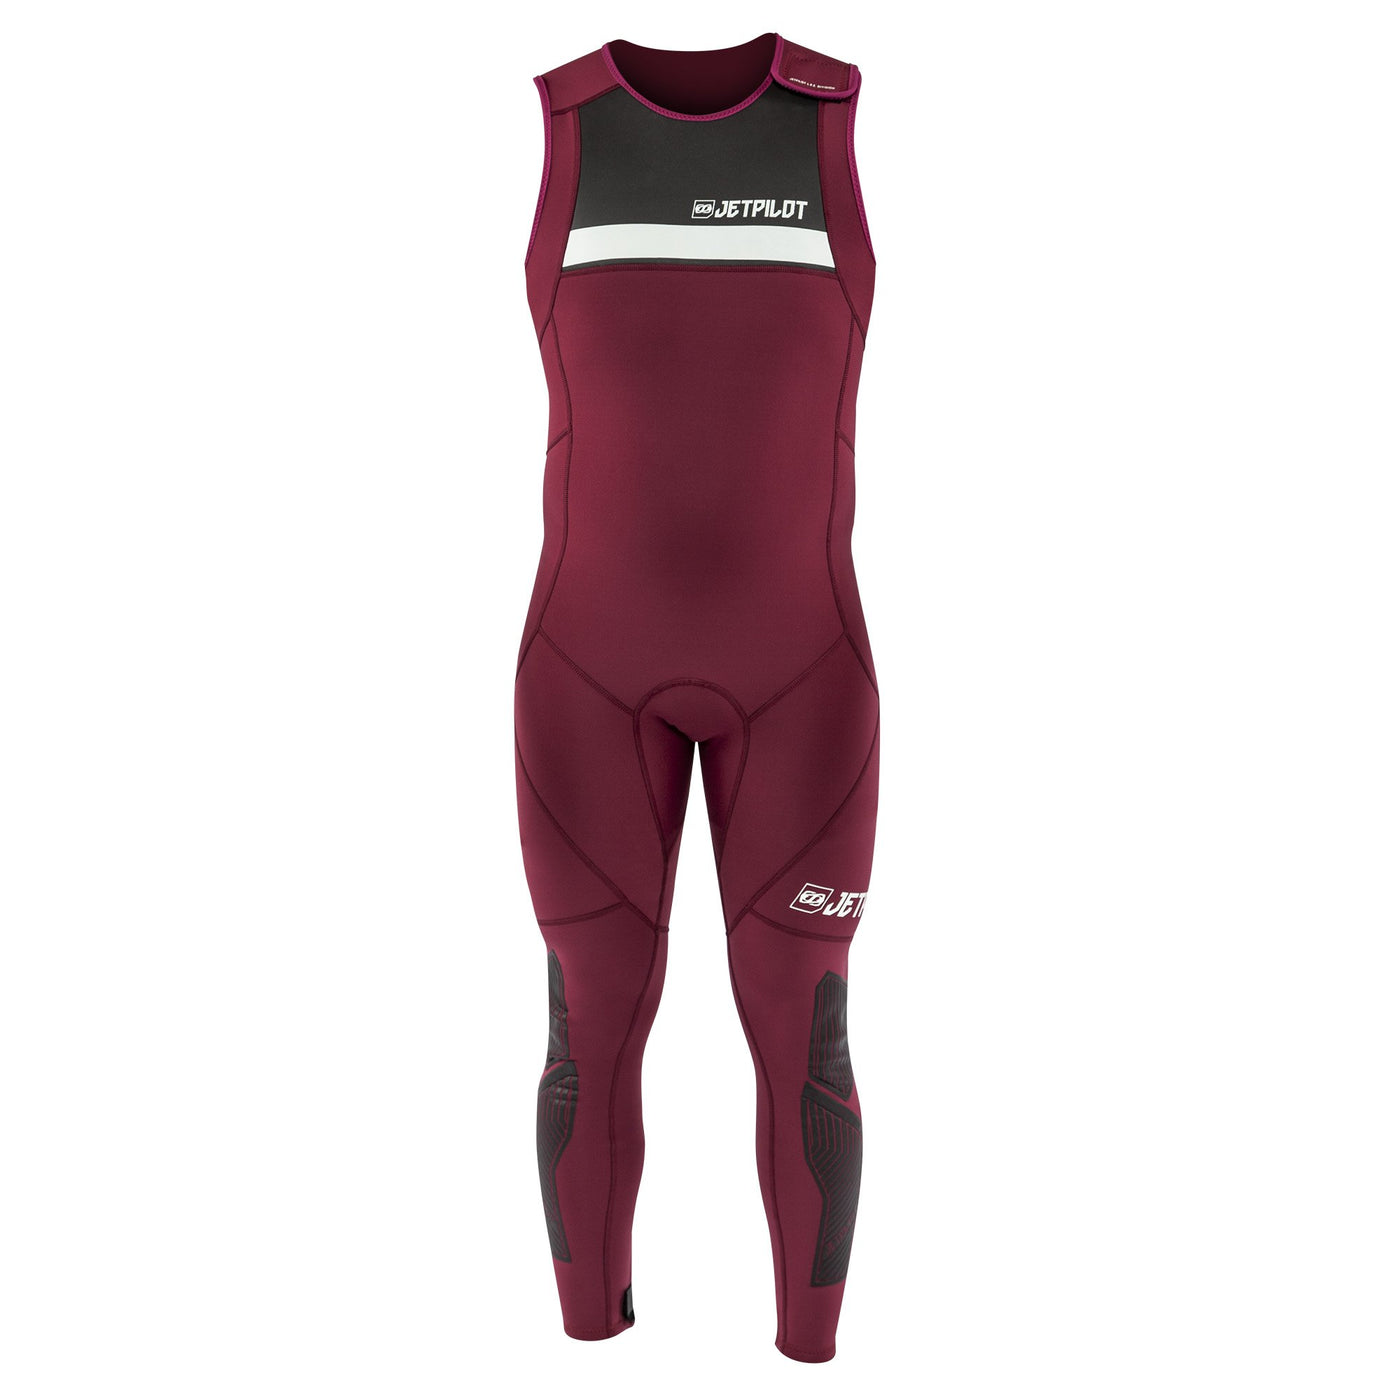 Front view of the Jetpilot L.R.E. John Wetsuit Maroon colorway.